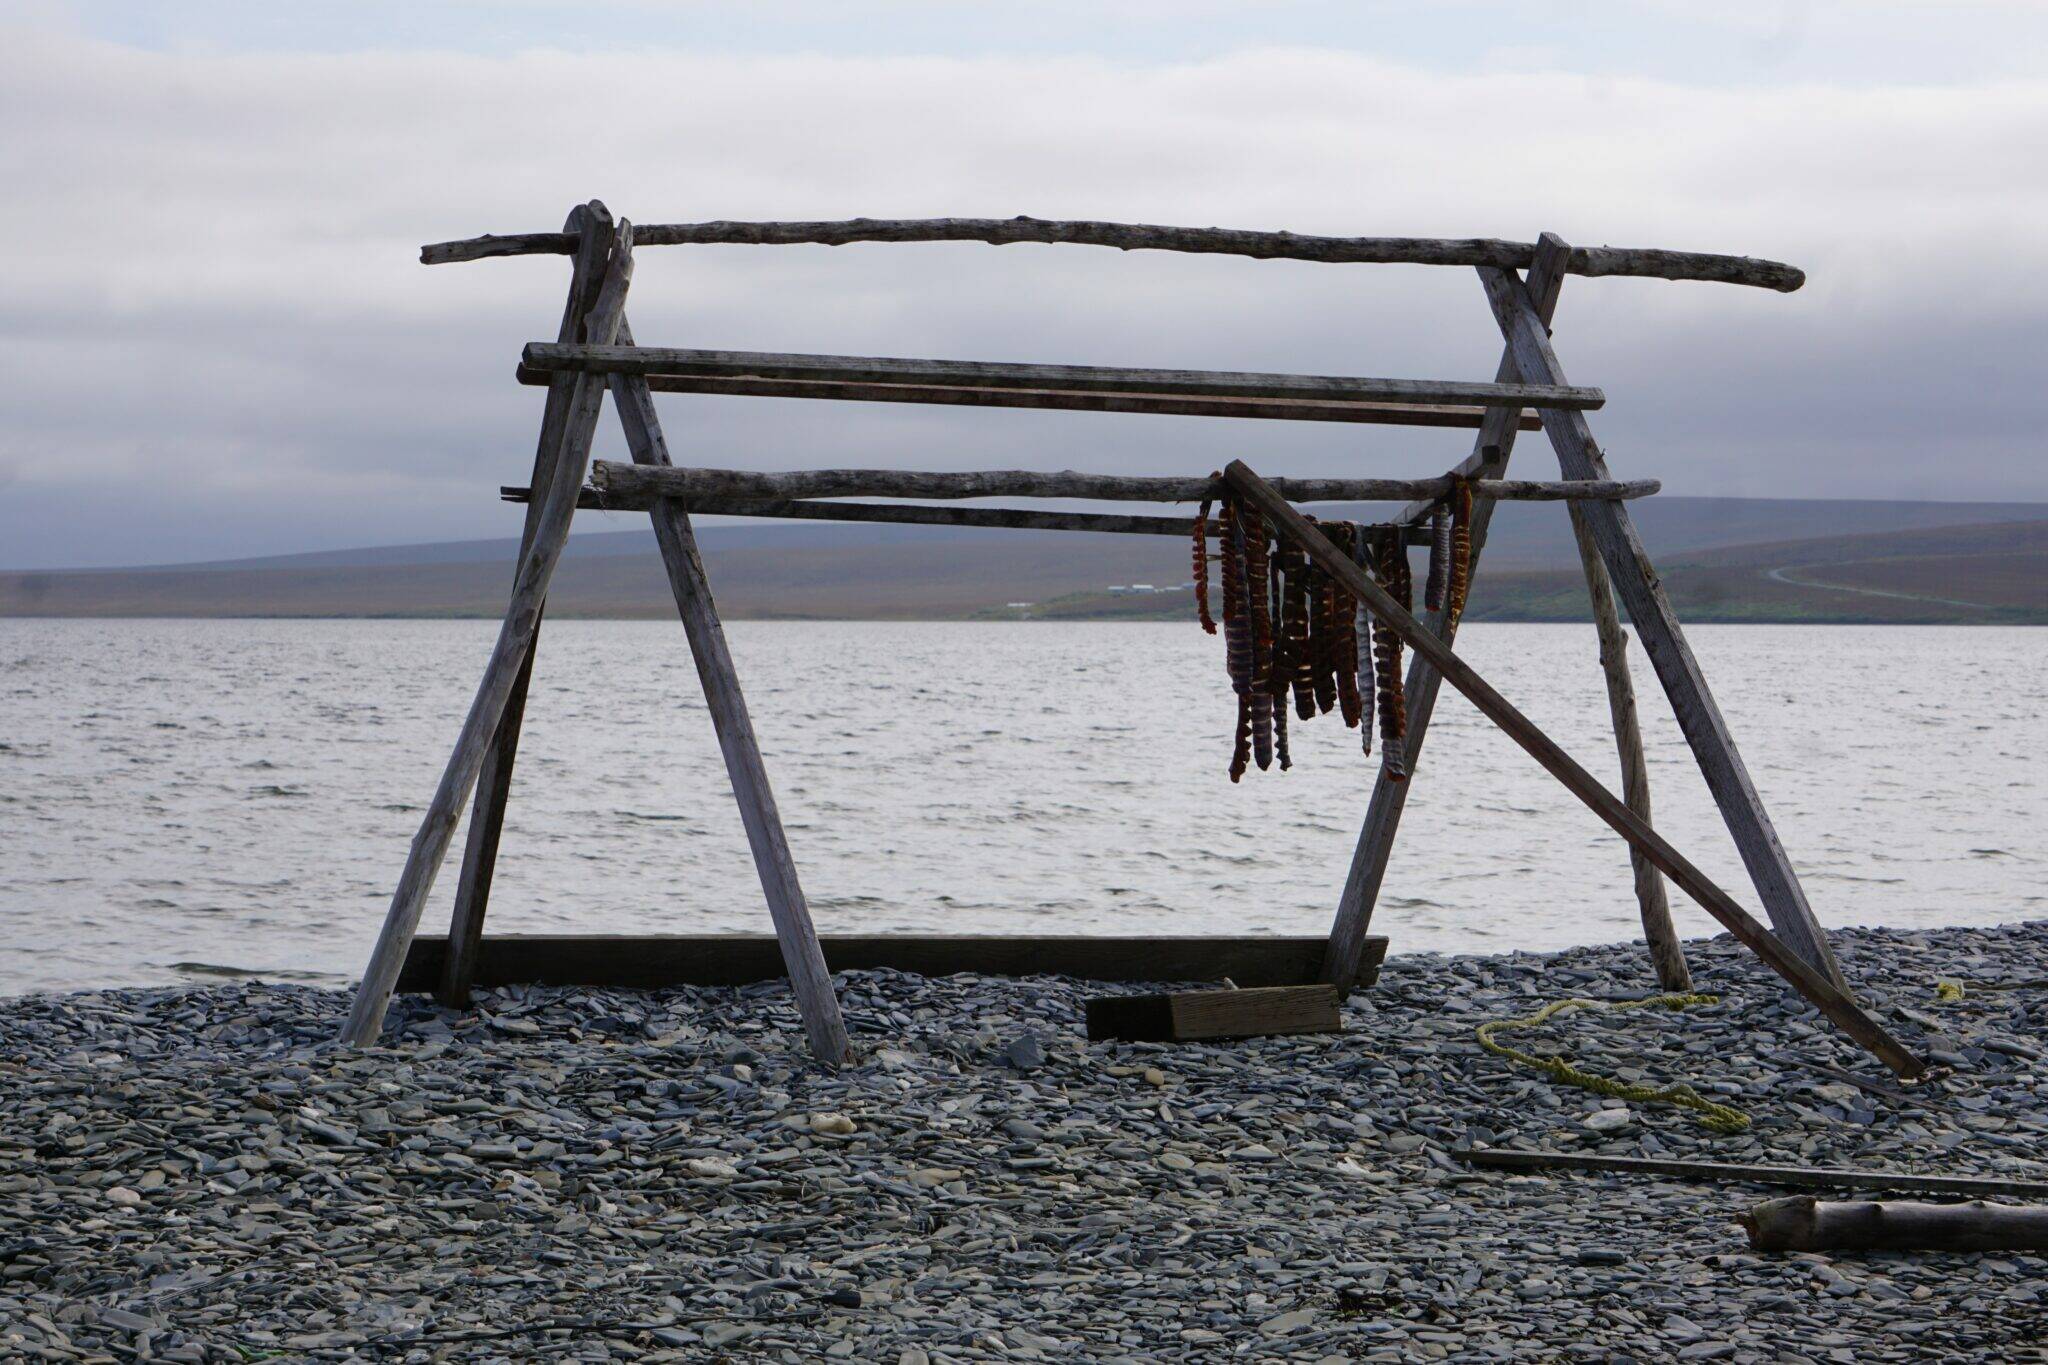 Salmon dries on a traditional rack on the beach in the Seward Peninsula village of Teller on Sept. 2, 2021. Salmon is a dietary staple for Indigenous residents of Western Alaska, and poor runs have created hardship. A new Alaska salmon task force mandated by federal law is now appointed and charged with producing a science plan within a year. (Photo by Yereth Rosen/Alaska Beacon)